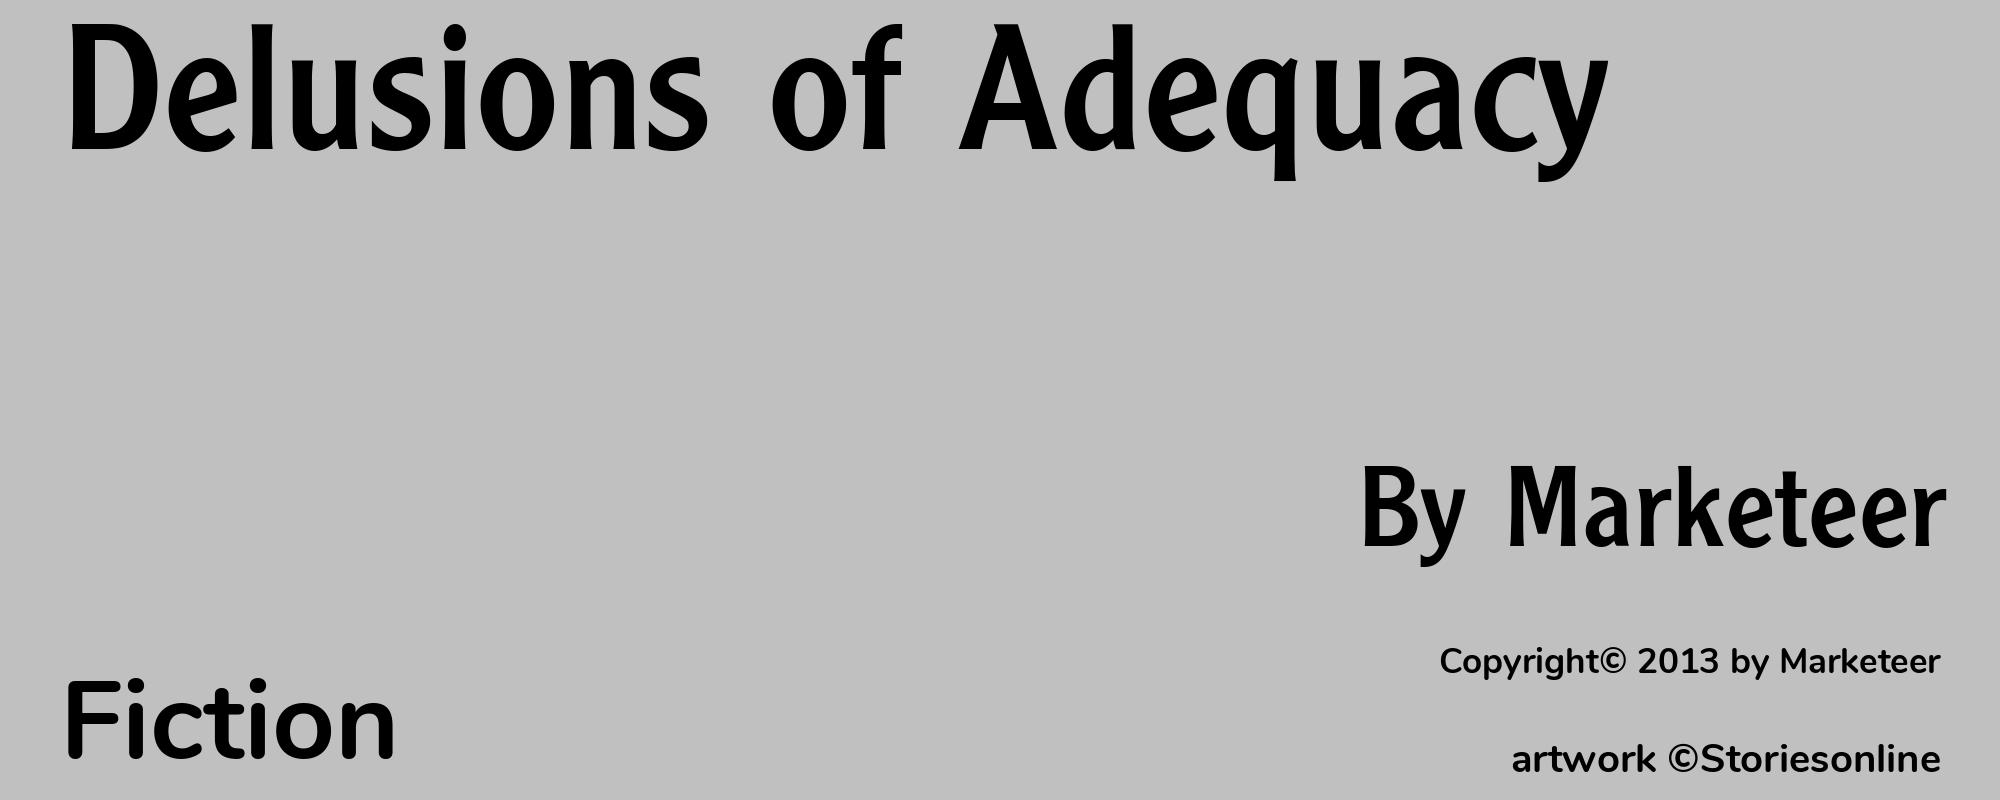 Delusions of Adequacy - Cover